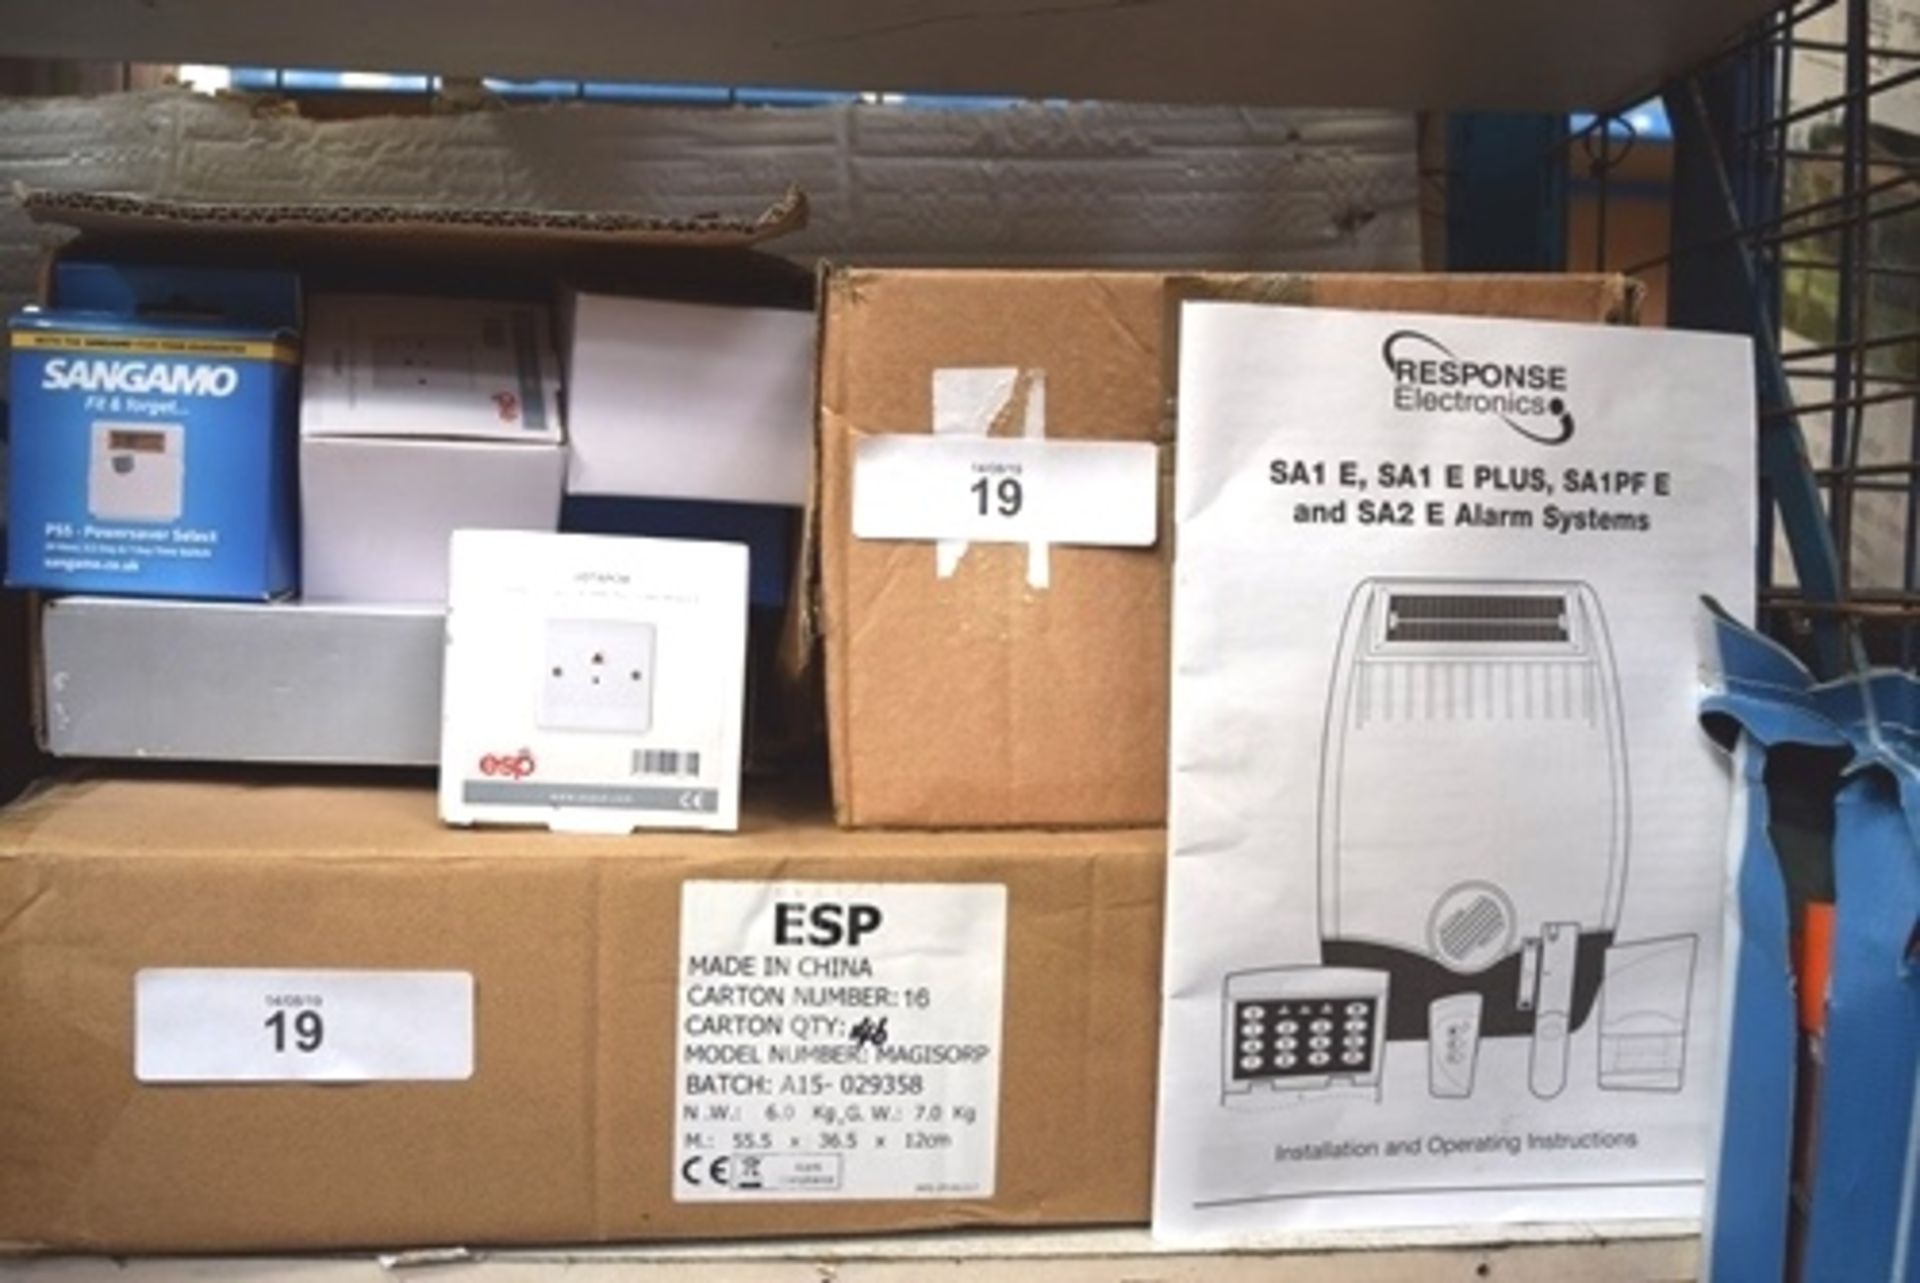 A quantity of ESP fire alarm products including toilet alarm, pull chord modules, Response SA1E